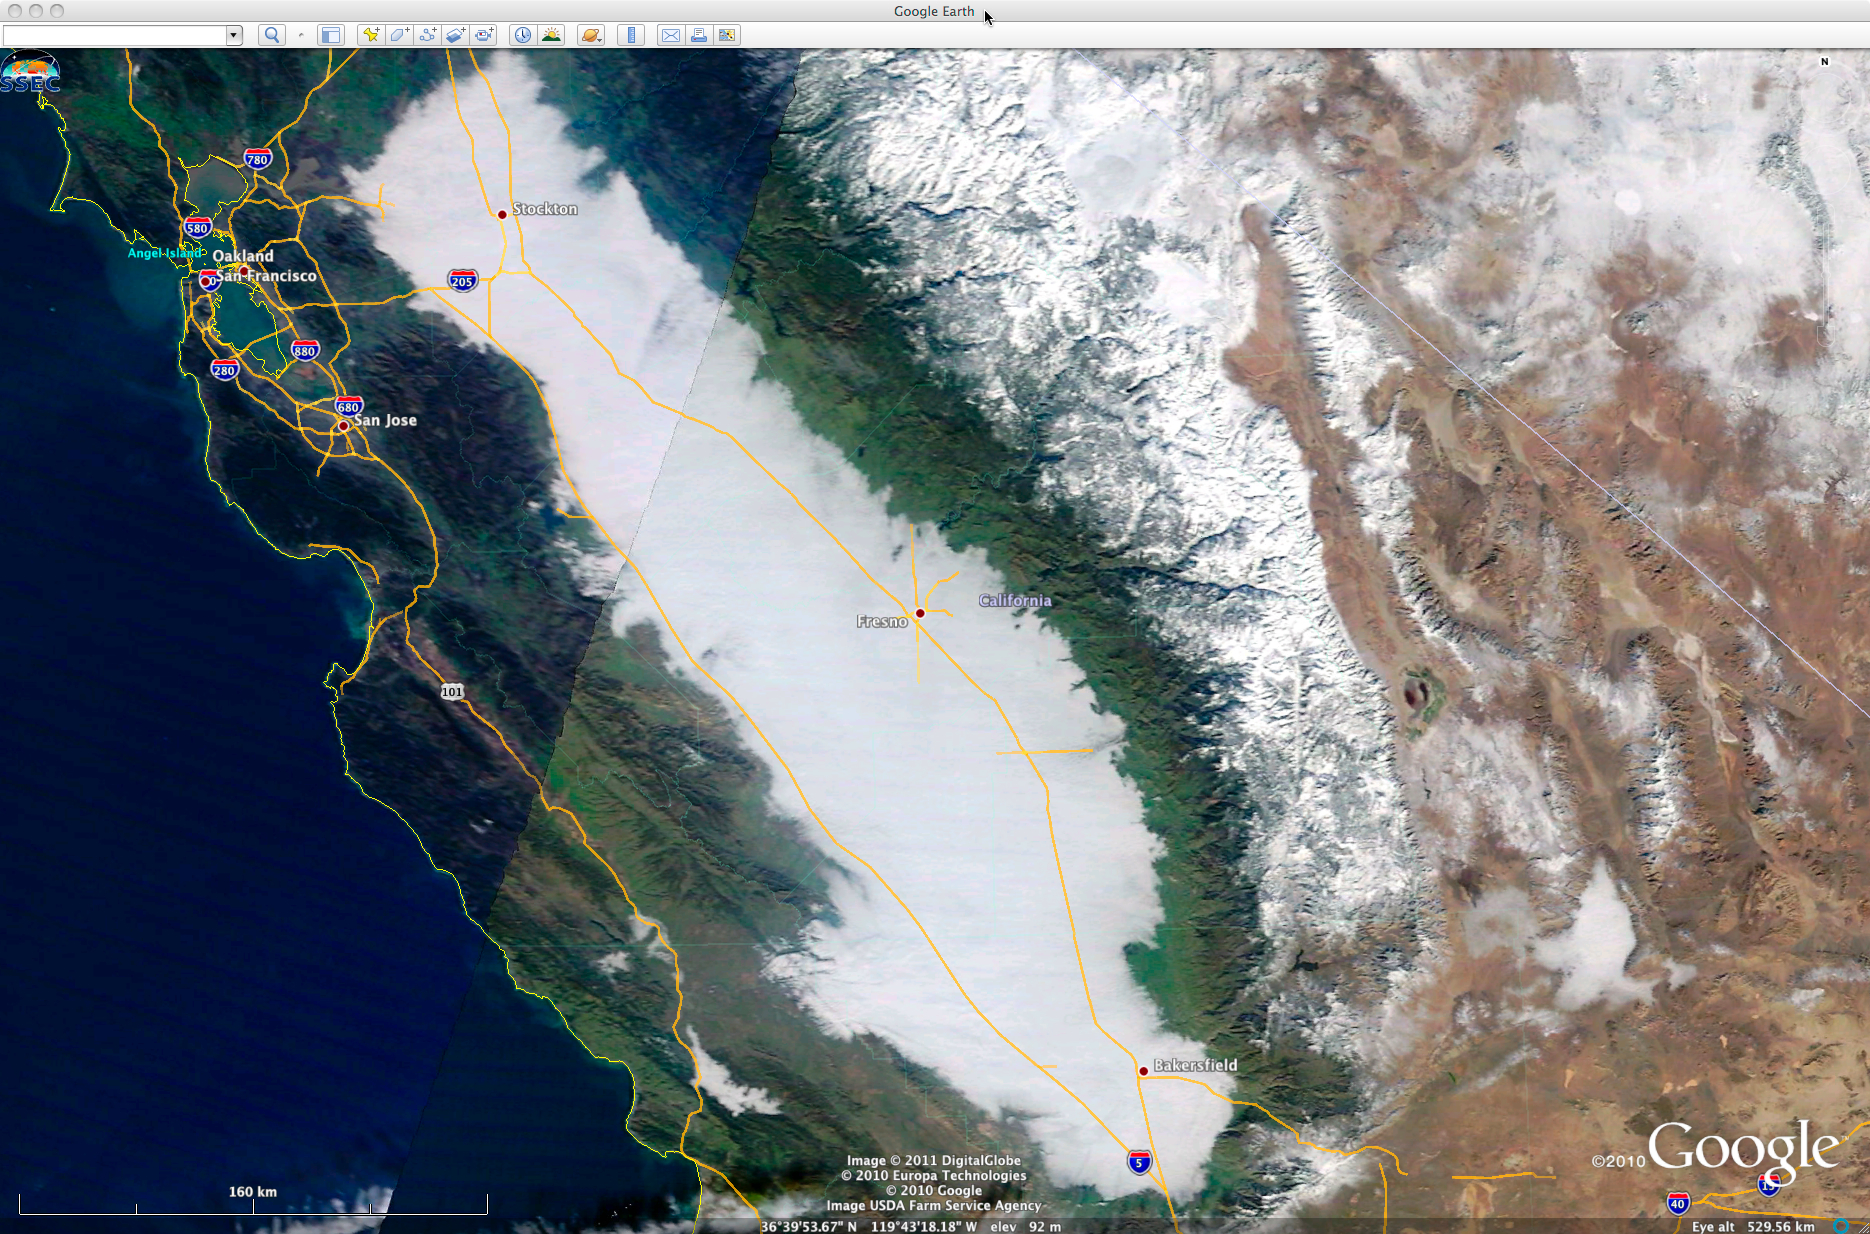 MODIS true color Red/Green/Blue (RGB) image (viewed using Google Earth)